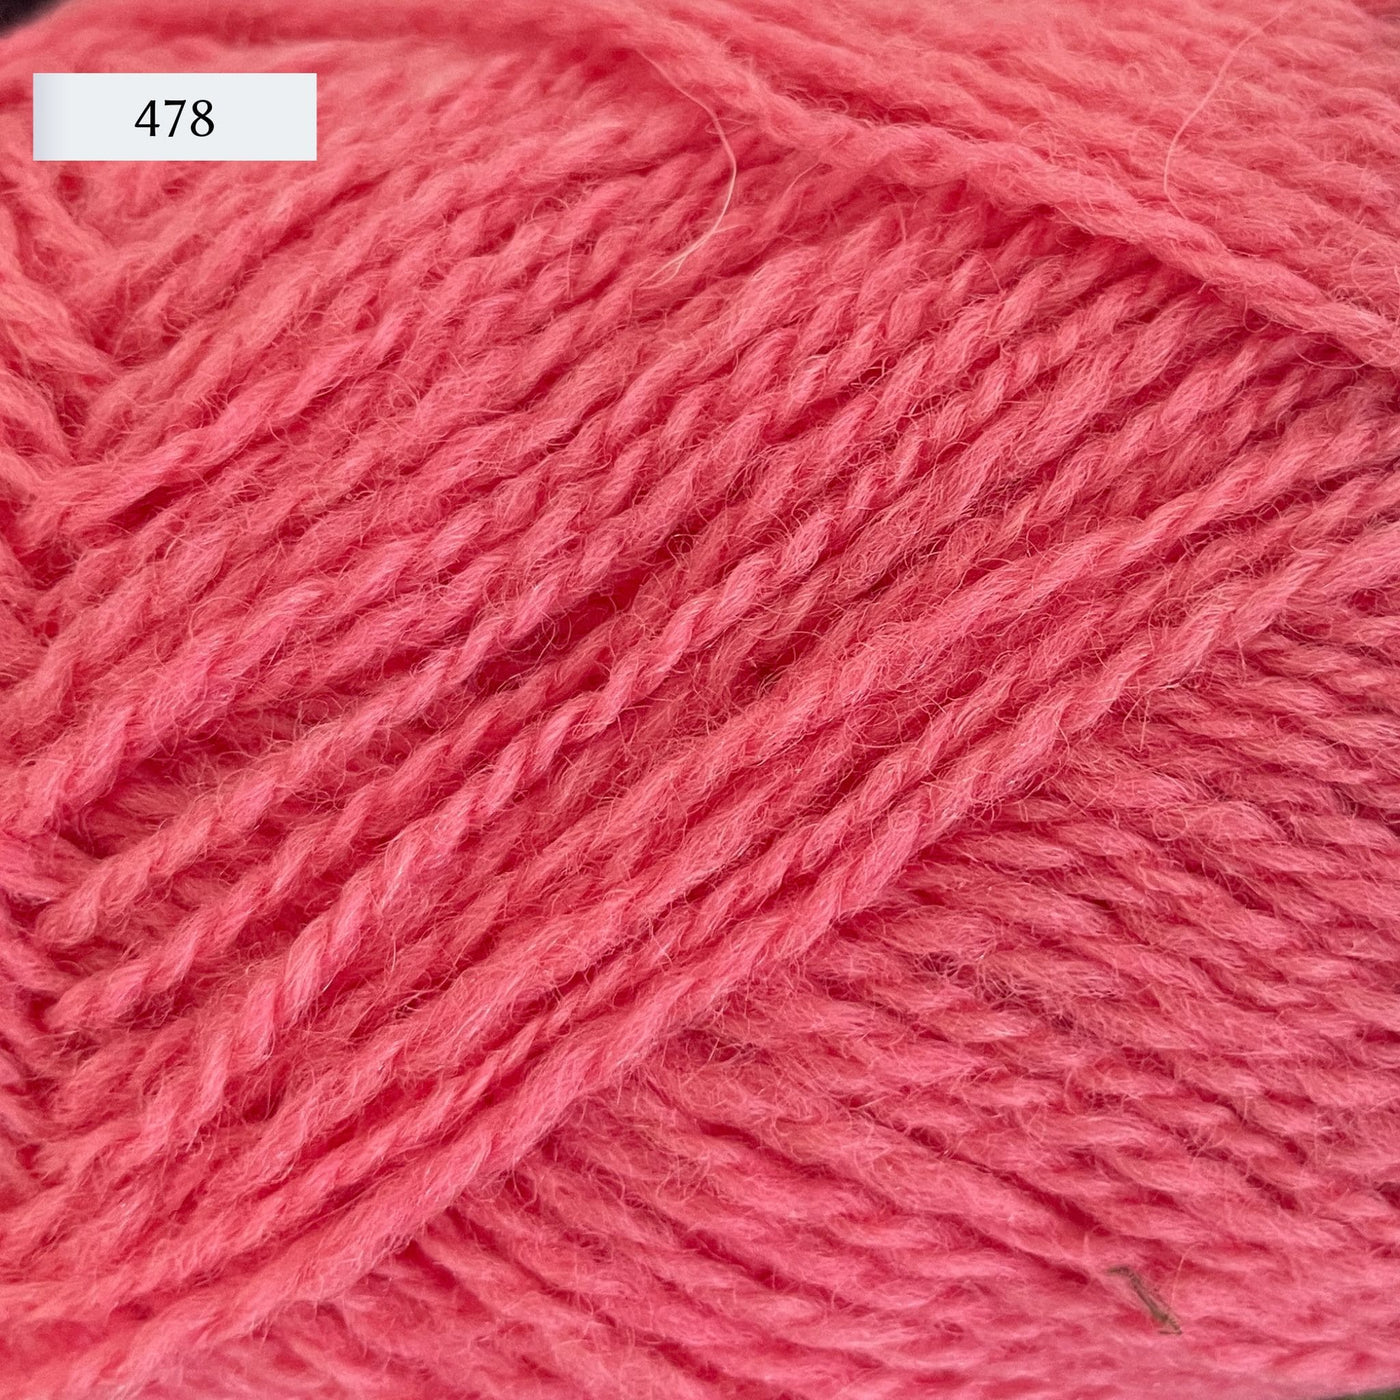 Rauma Finullgarn, a fingering/sport weight yarn, in color 478, a cotton candy pink